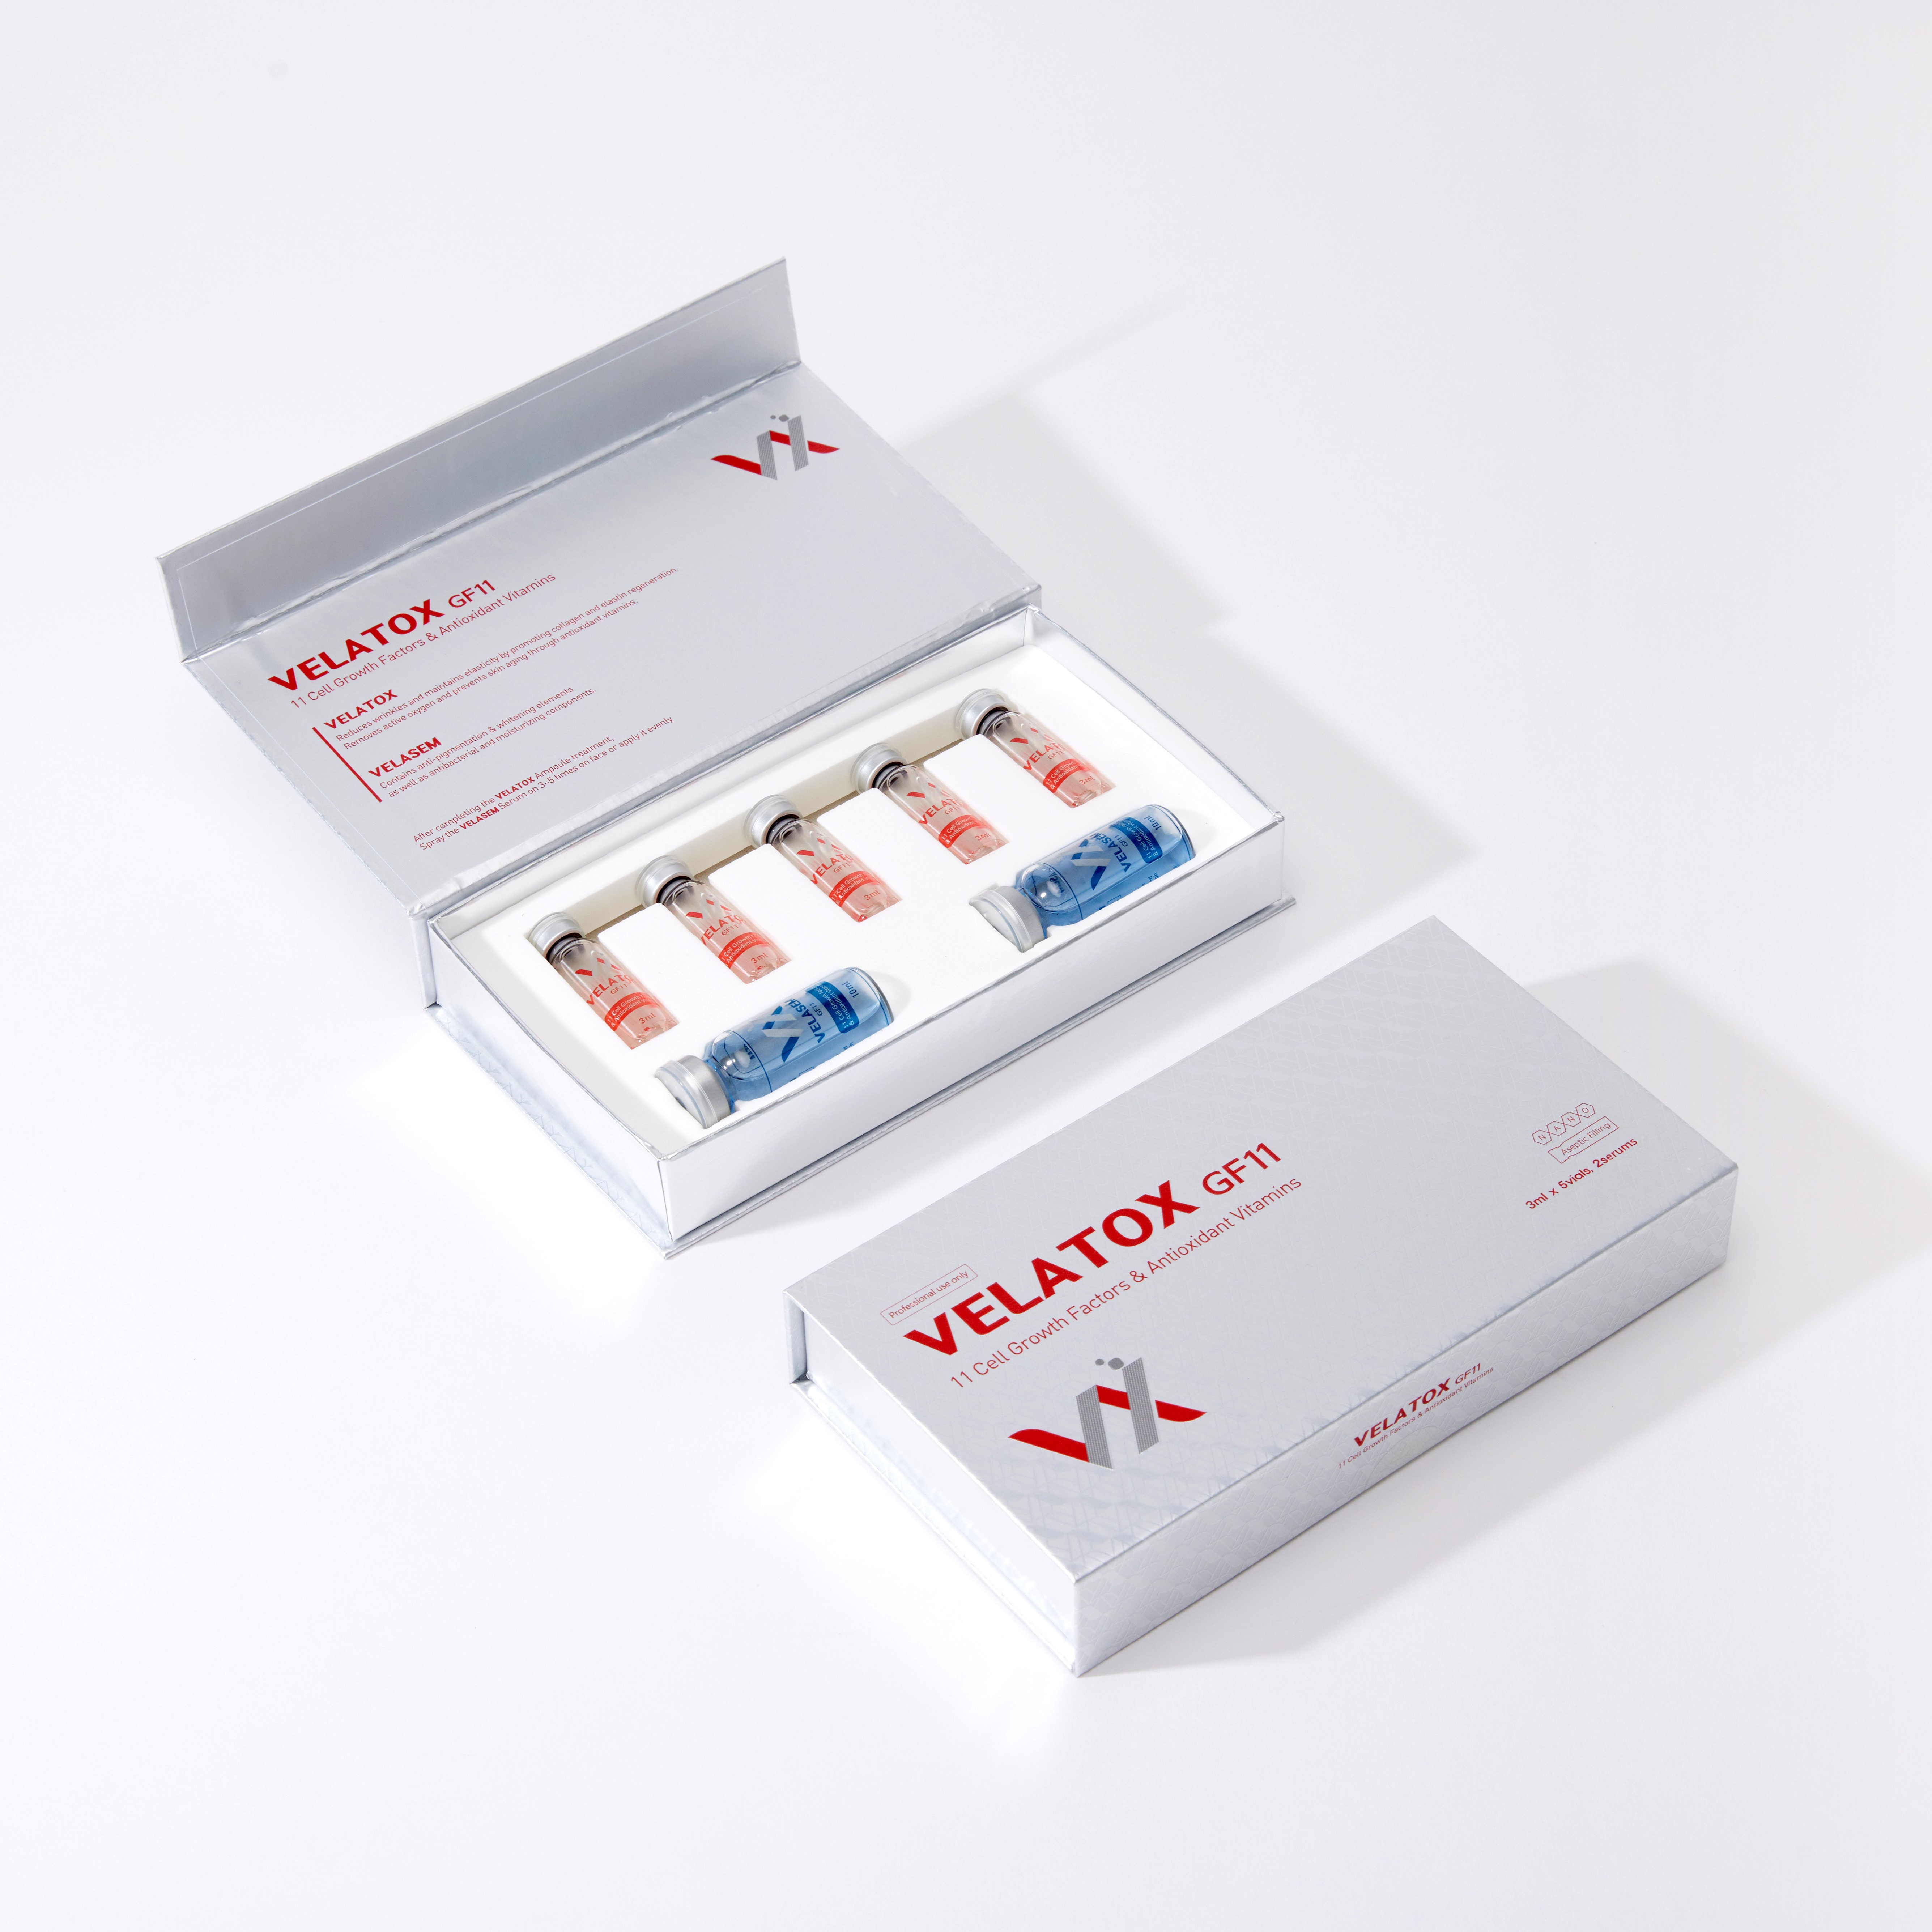 VELATOX Premium Skin Booster with 11 Cell Growth Factors